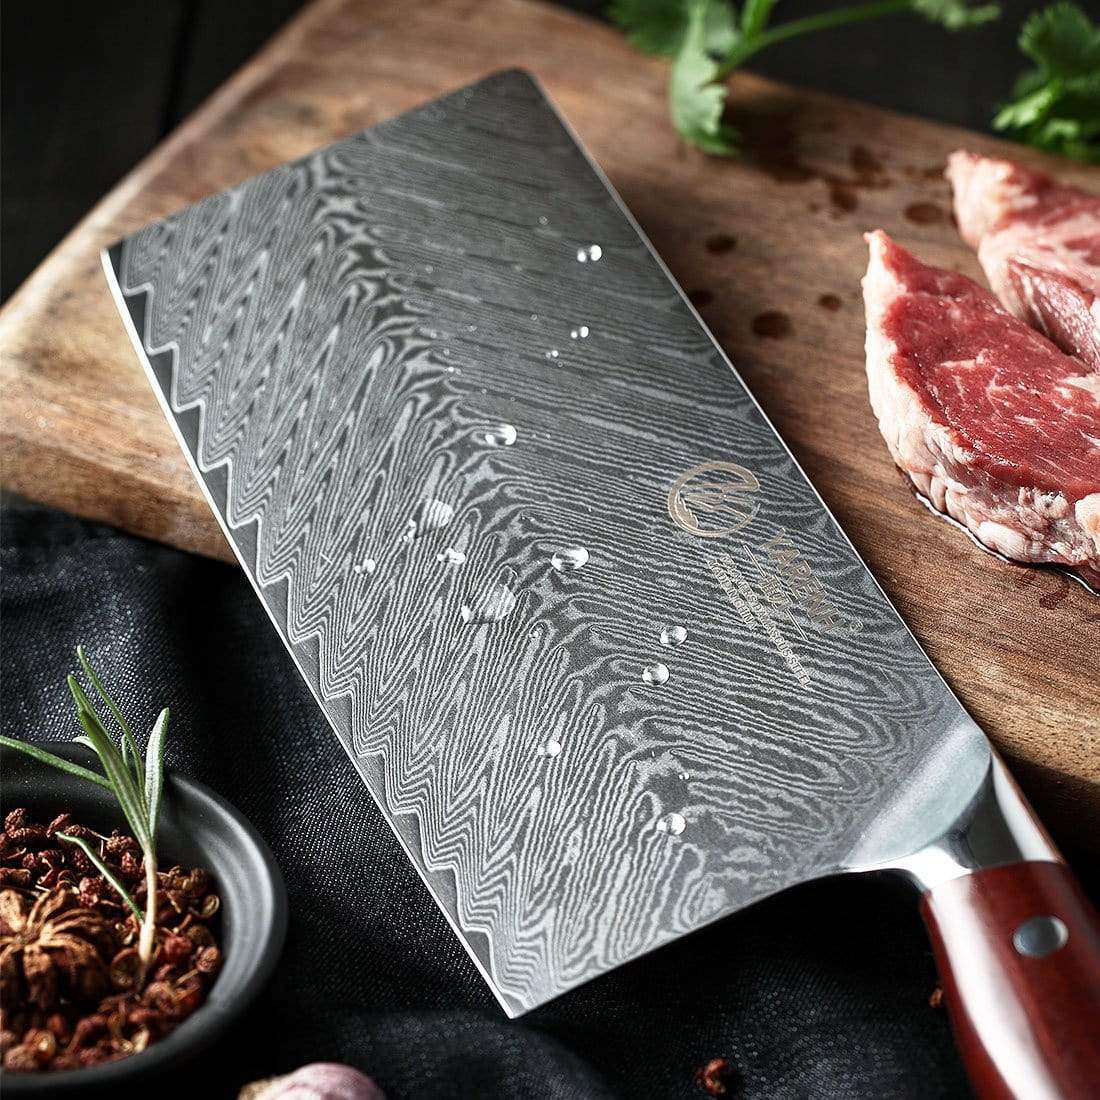 KTF Series - Damascus Chinese Cleaver Knife 7 inch yarenh Damascus Steel